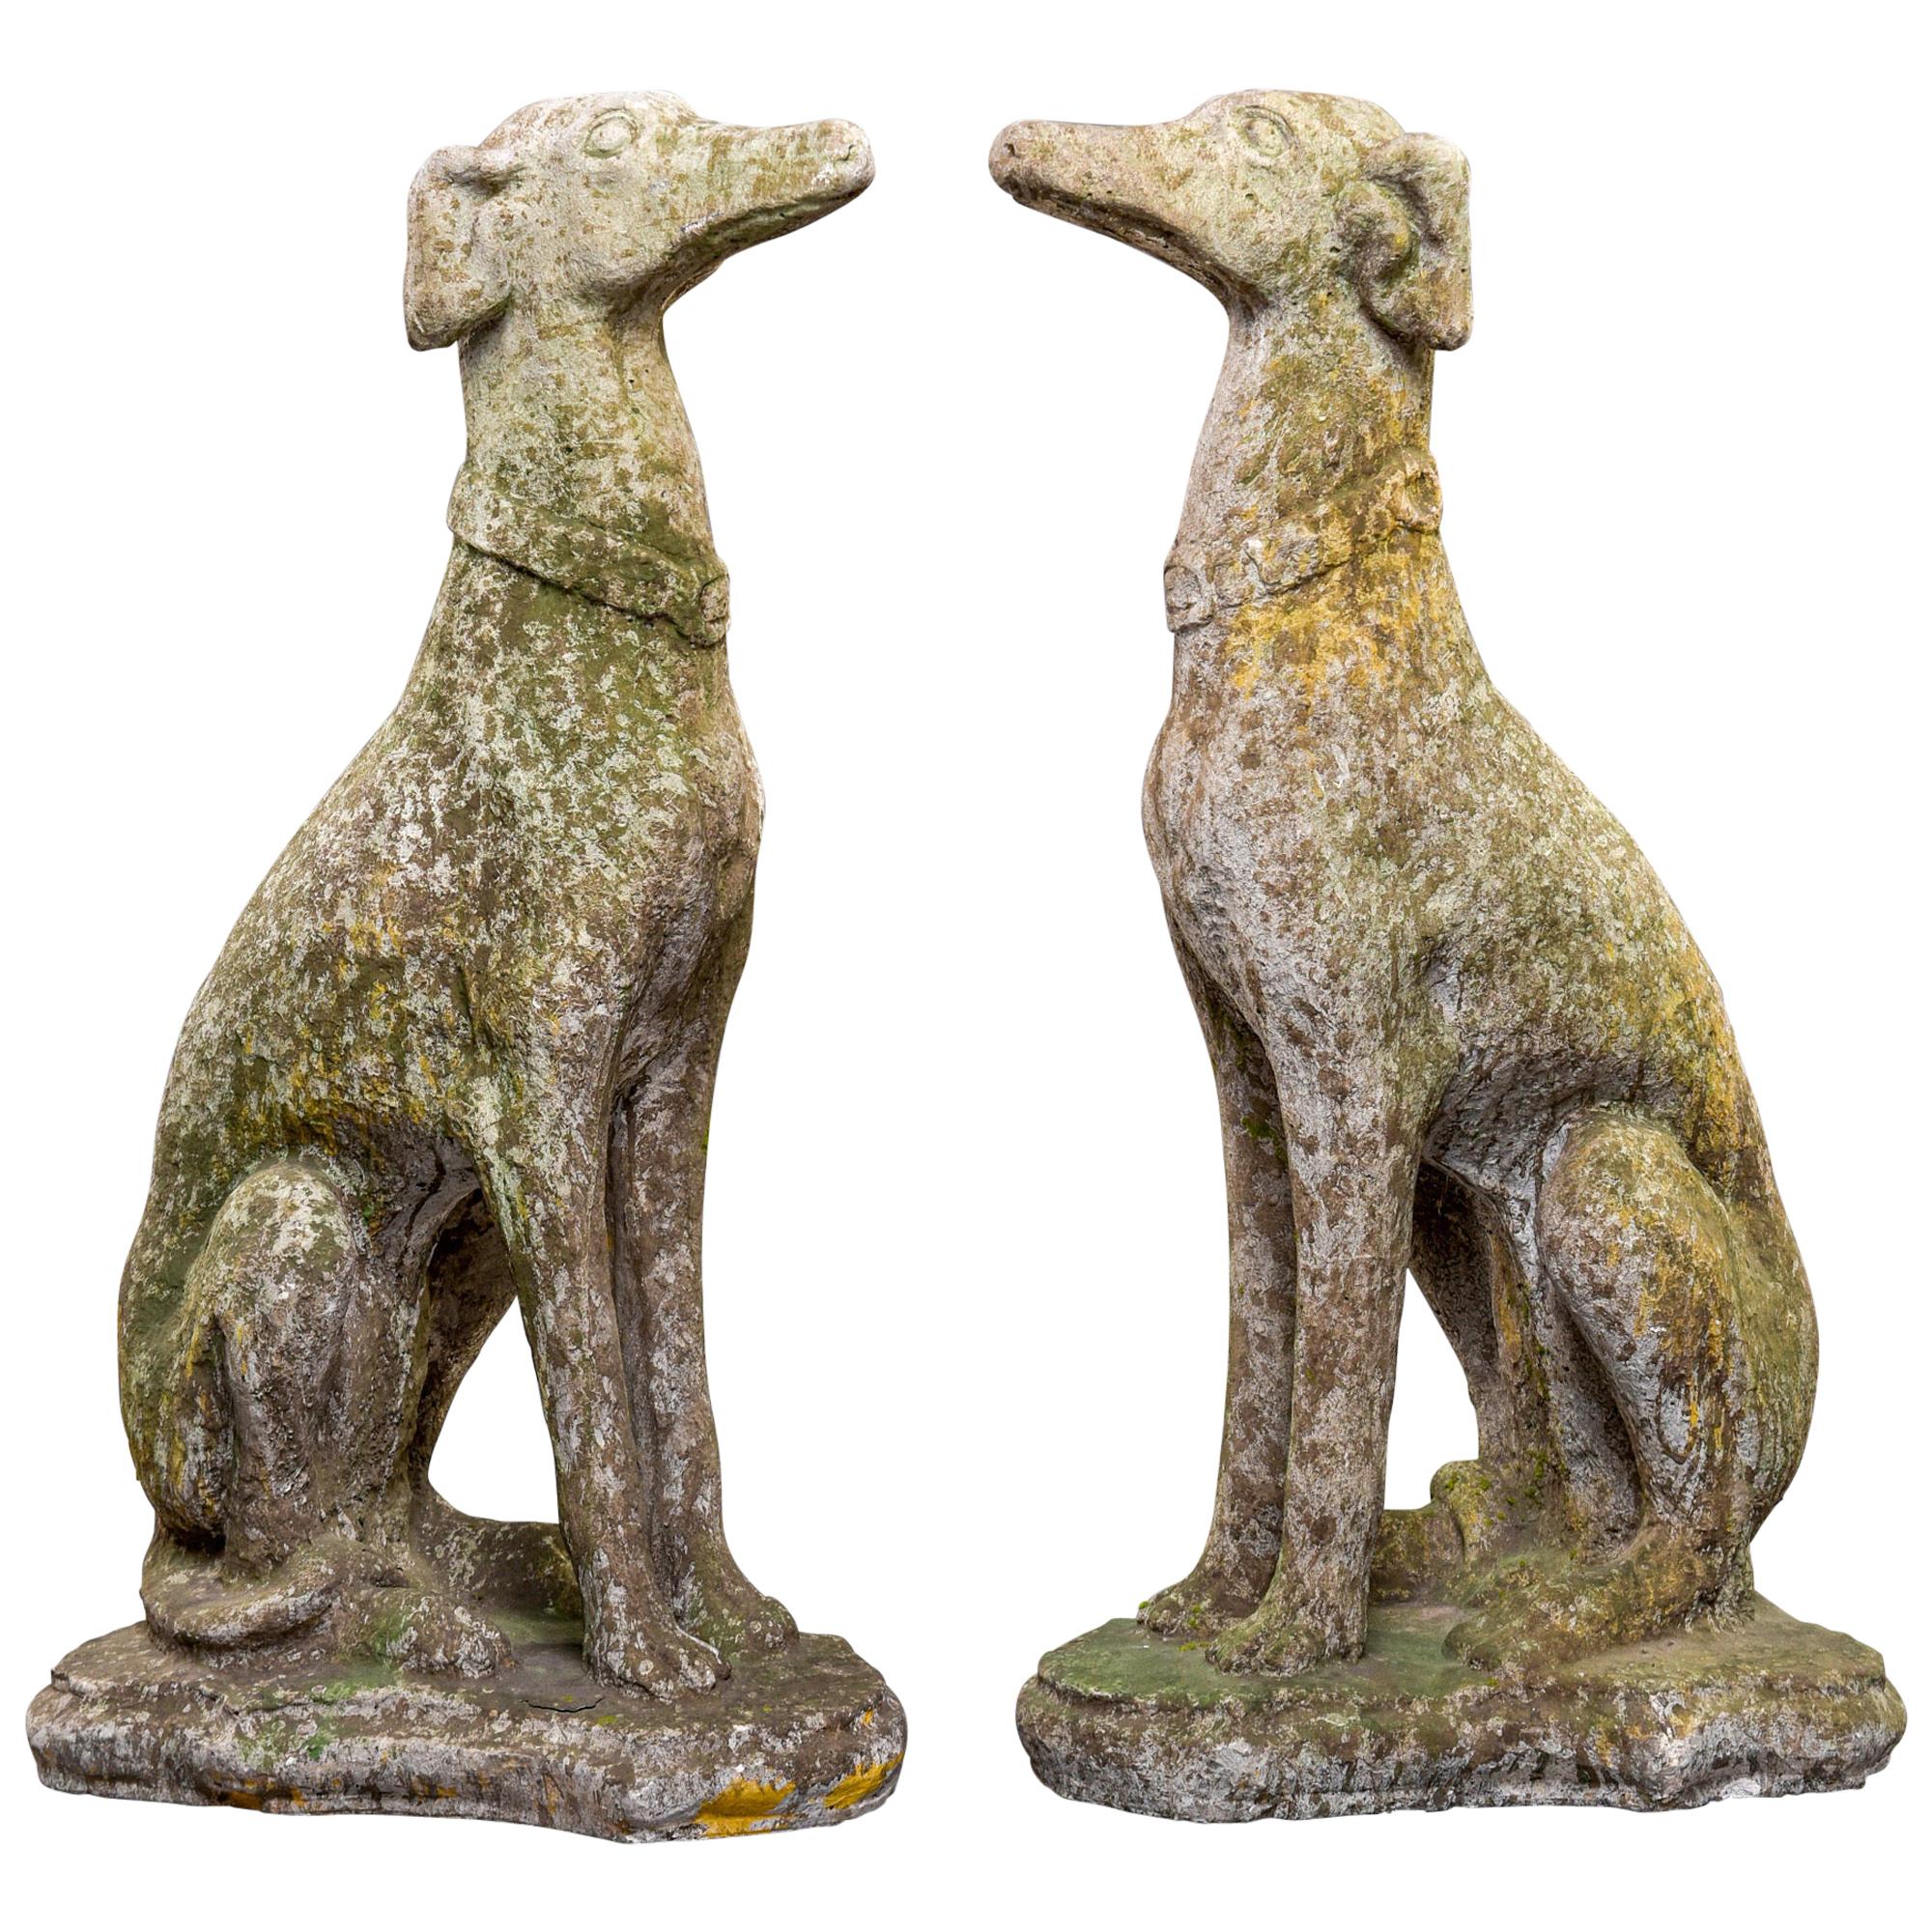 Pair of Early 20th Century French Whippet Dog Garden Statues